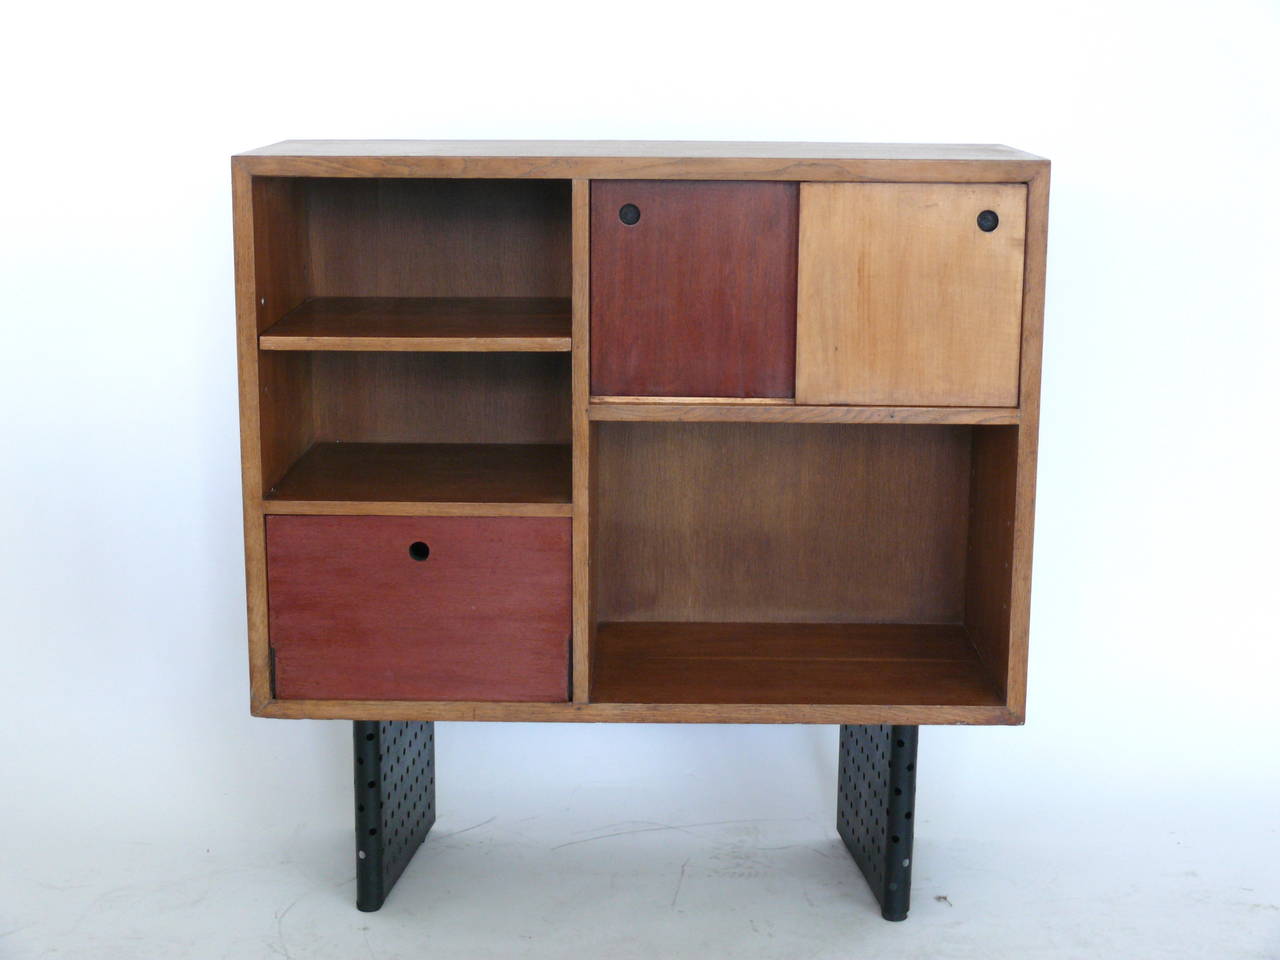 Gorgeous cabinet or bookcase designed by Escande, a student of Prouve. The cabinets are made of oak and rest on perforated iron legs. Designed for the Anthony building in Strasbourg, France. Two other versions also available.